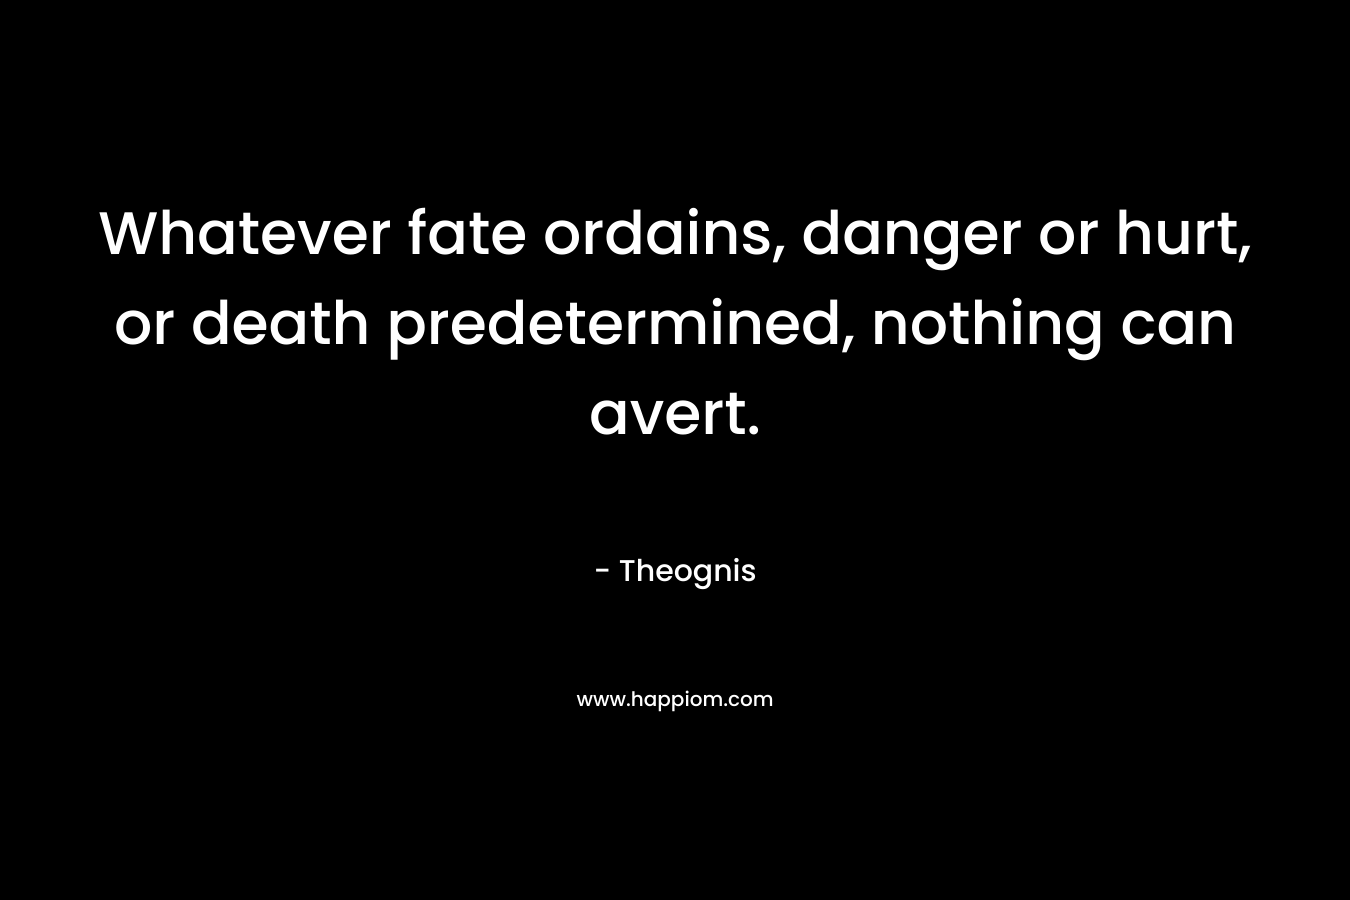 Whatever fate ordains, danger or hurt, or death predetermined, nothing can avert. – Theognis